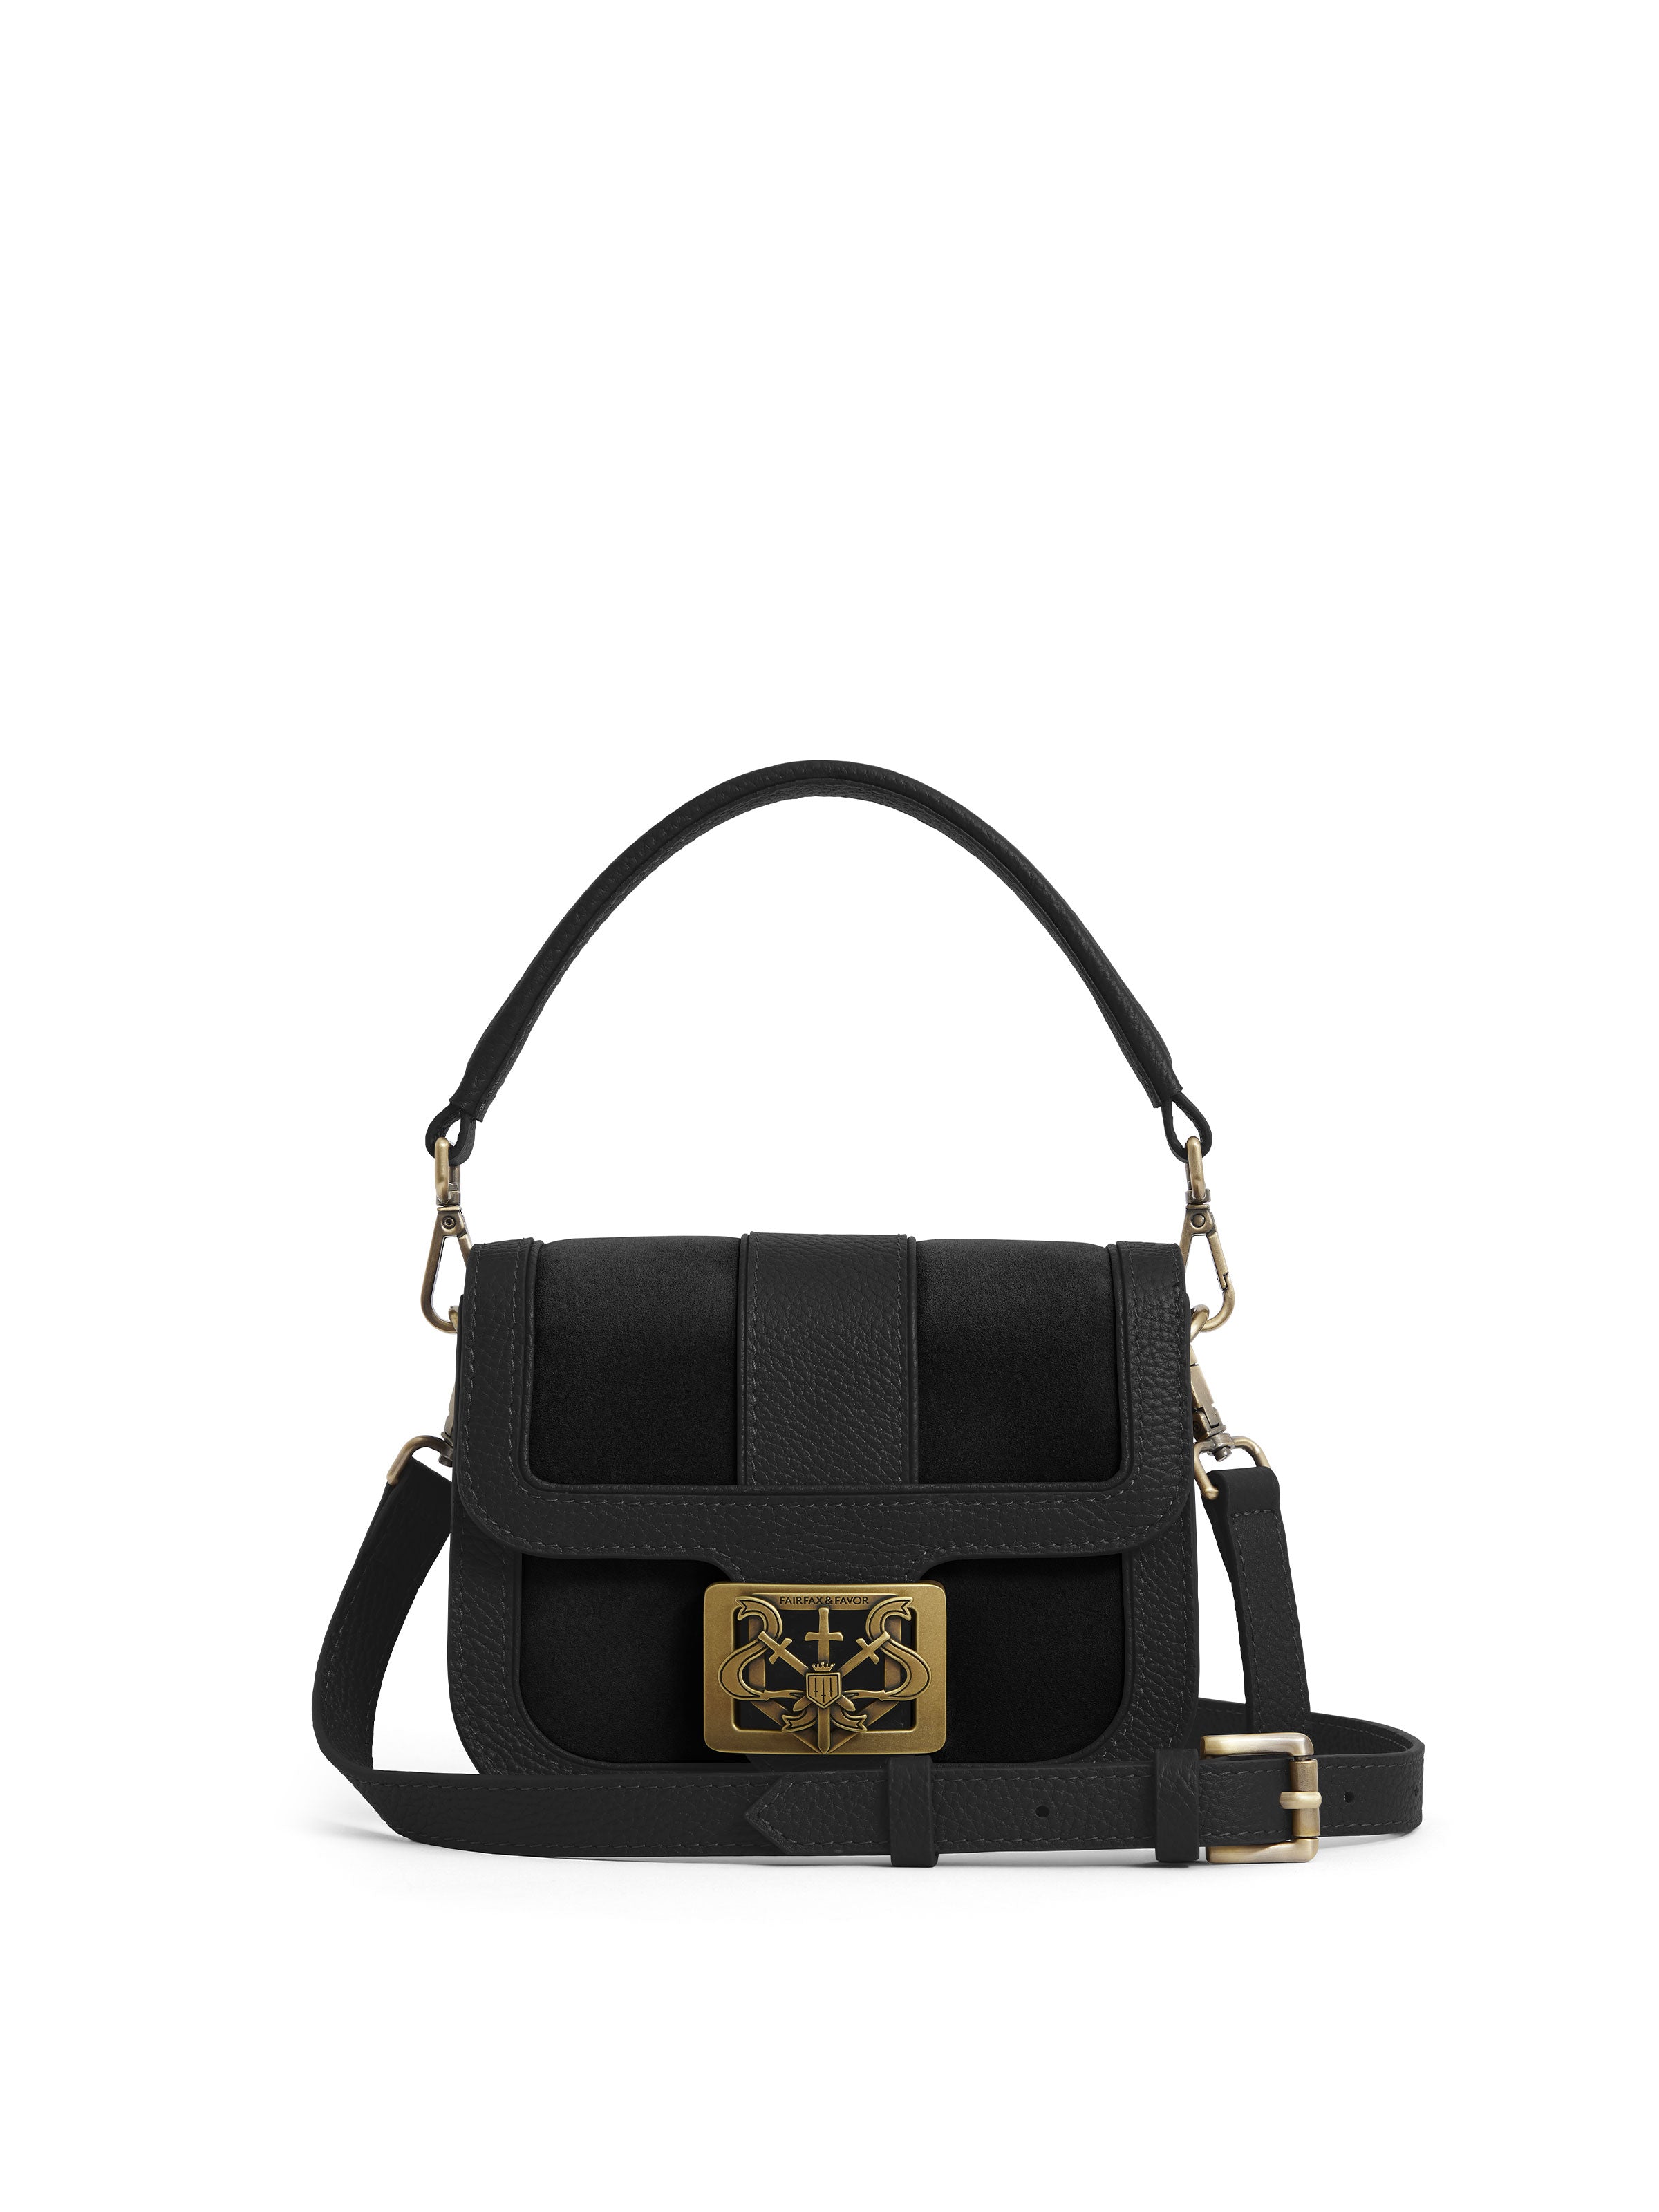 The Clarence - Women's Bag - Black Suede | Fairfax & Favor